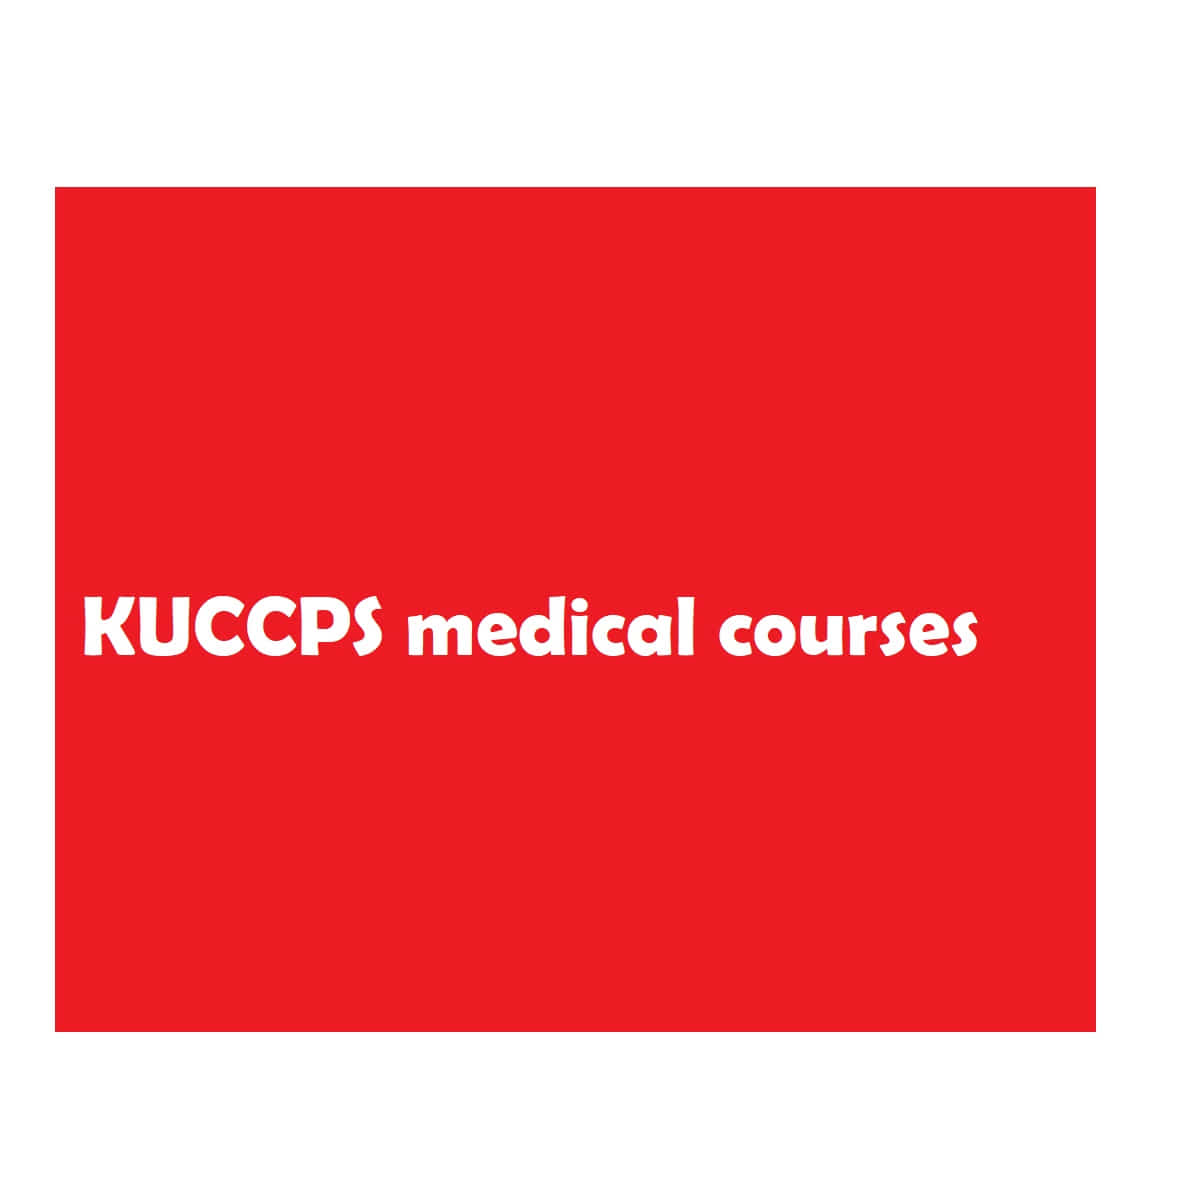 KUCCPS medical courses